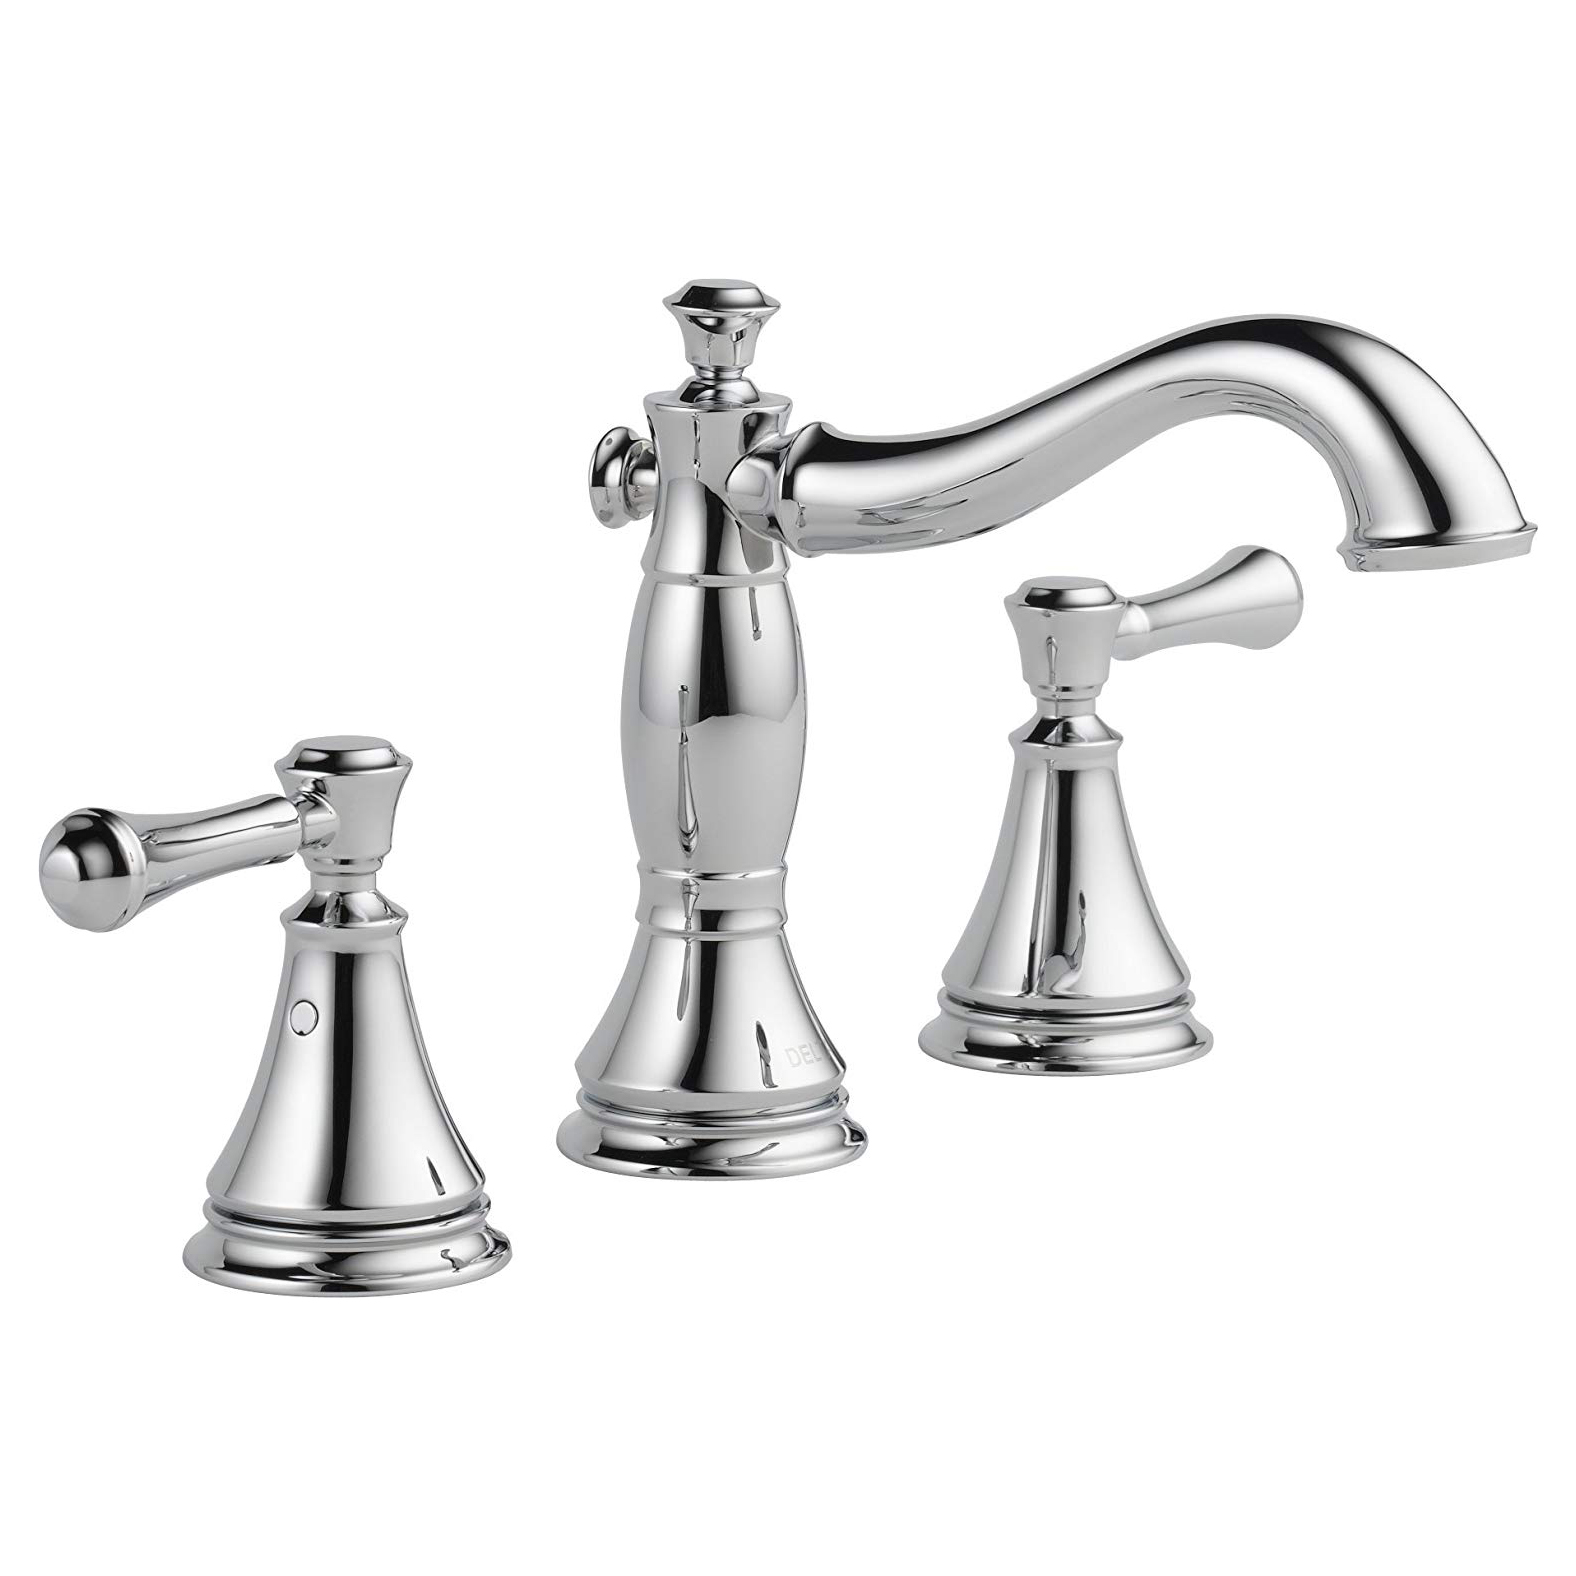 Cassidy Widespread Lavatory Faucet Kit in Chrome